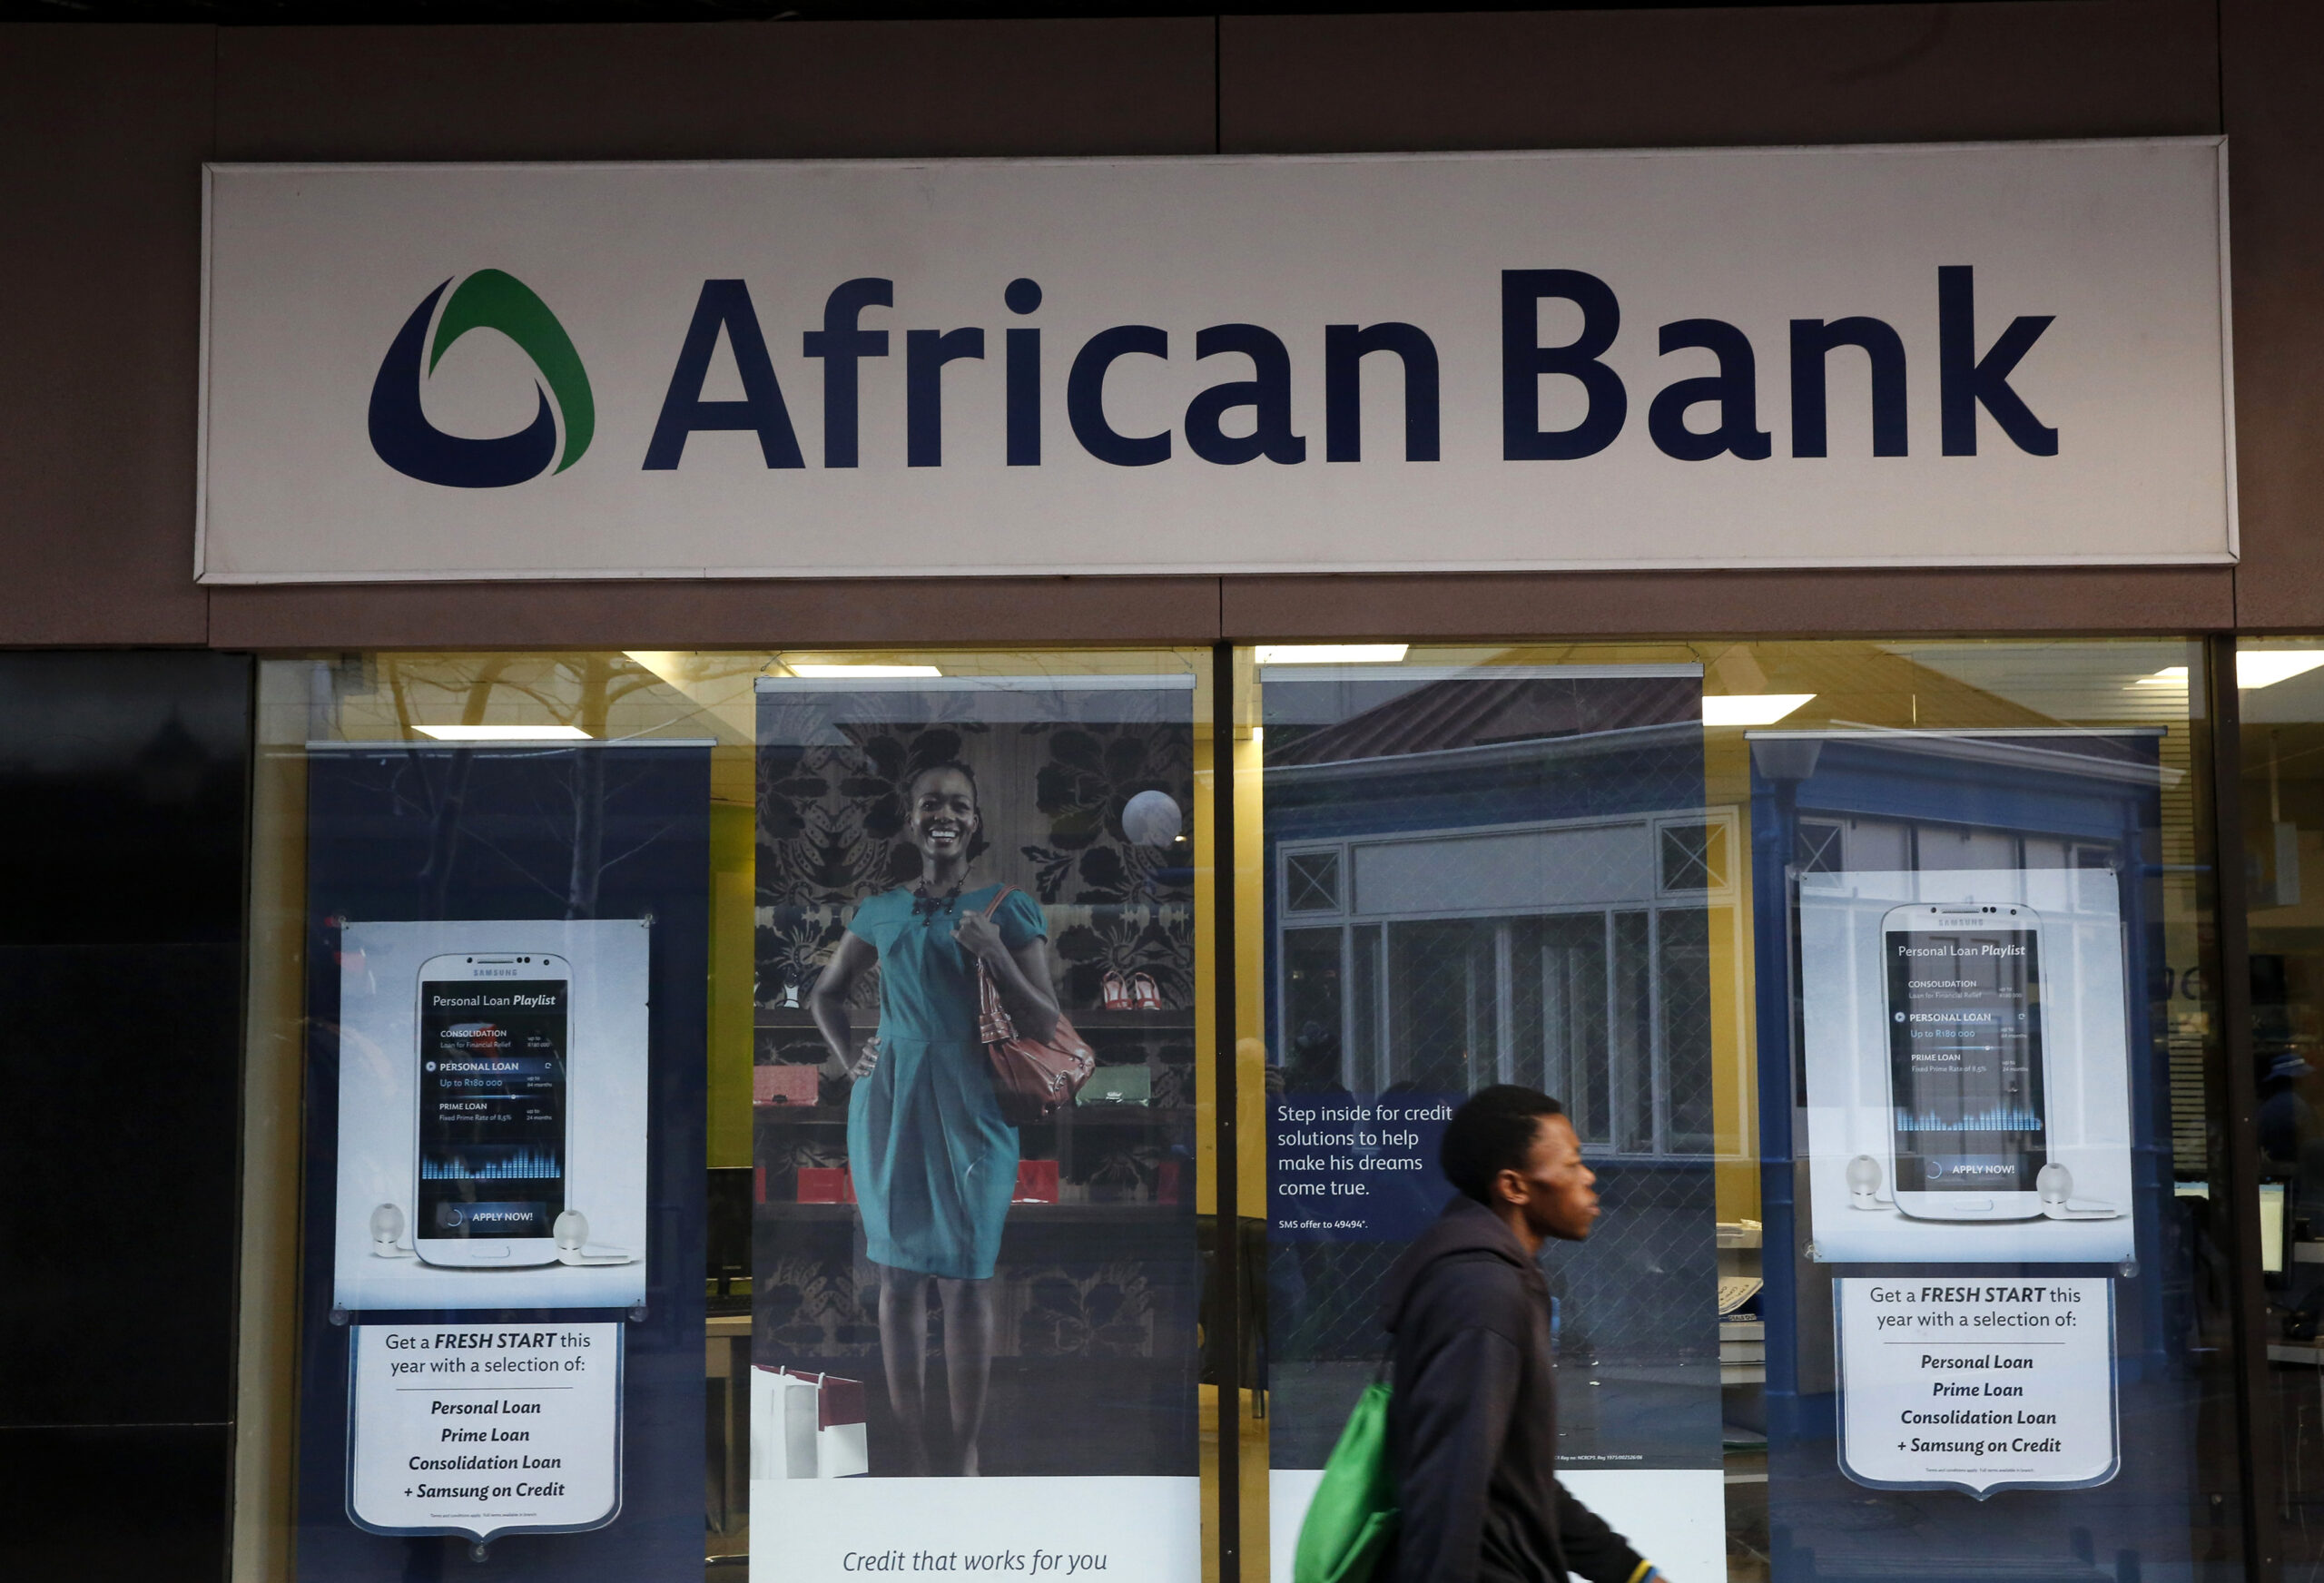 African banks face collapse risk from environmental damage